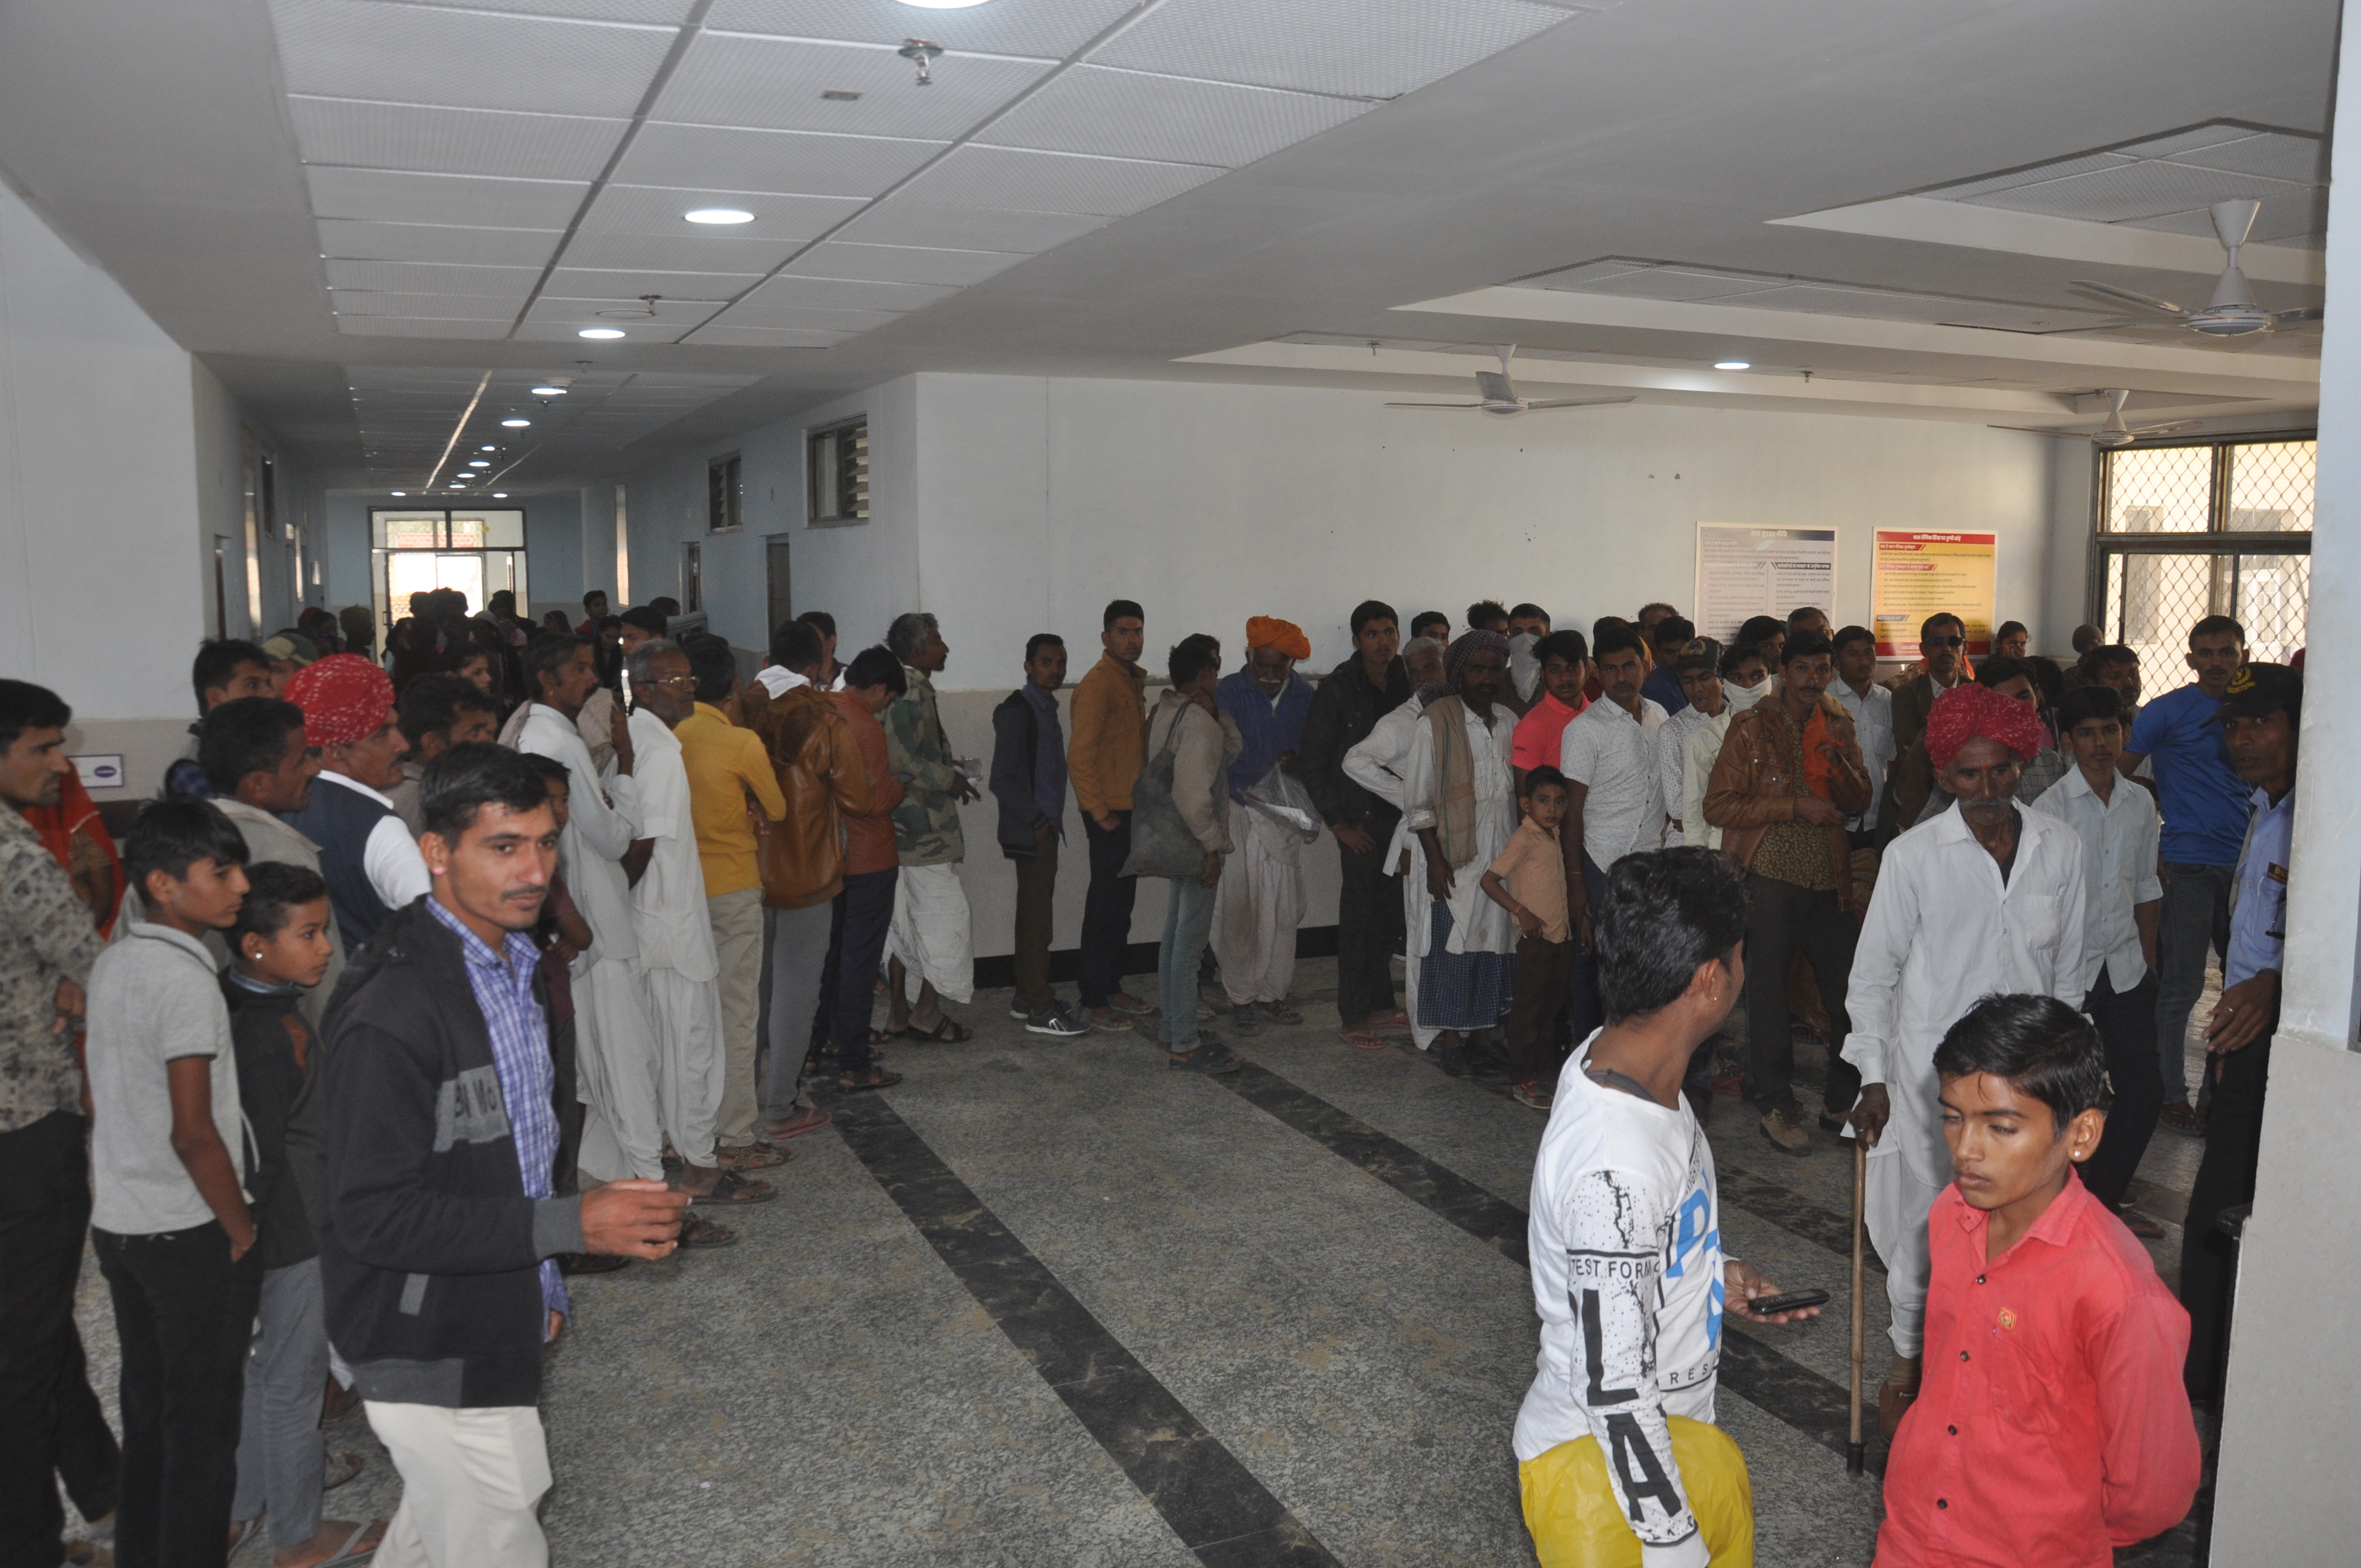 Crowd of patients in hospital, doctor 'nadarad'